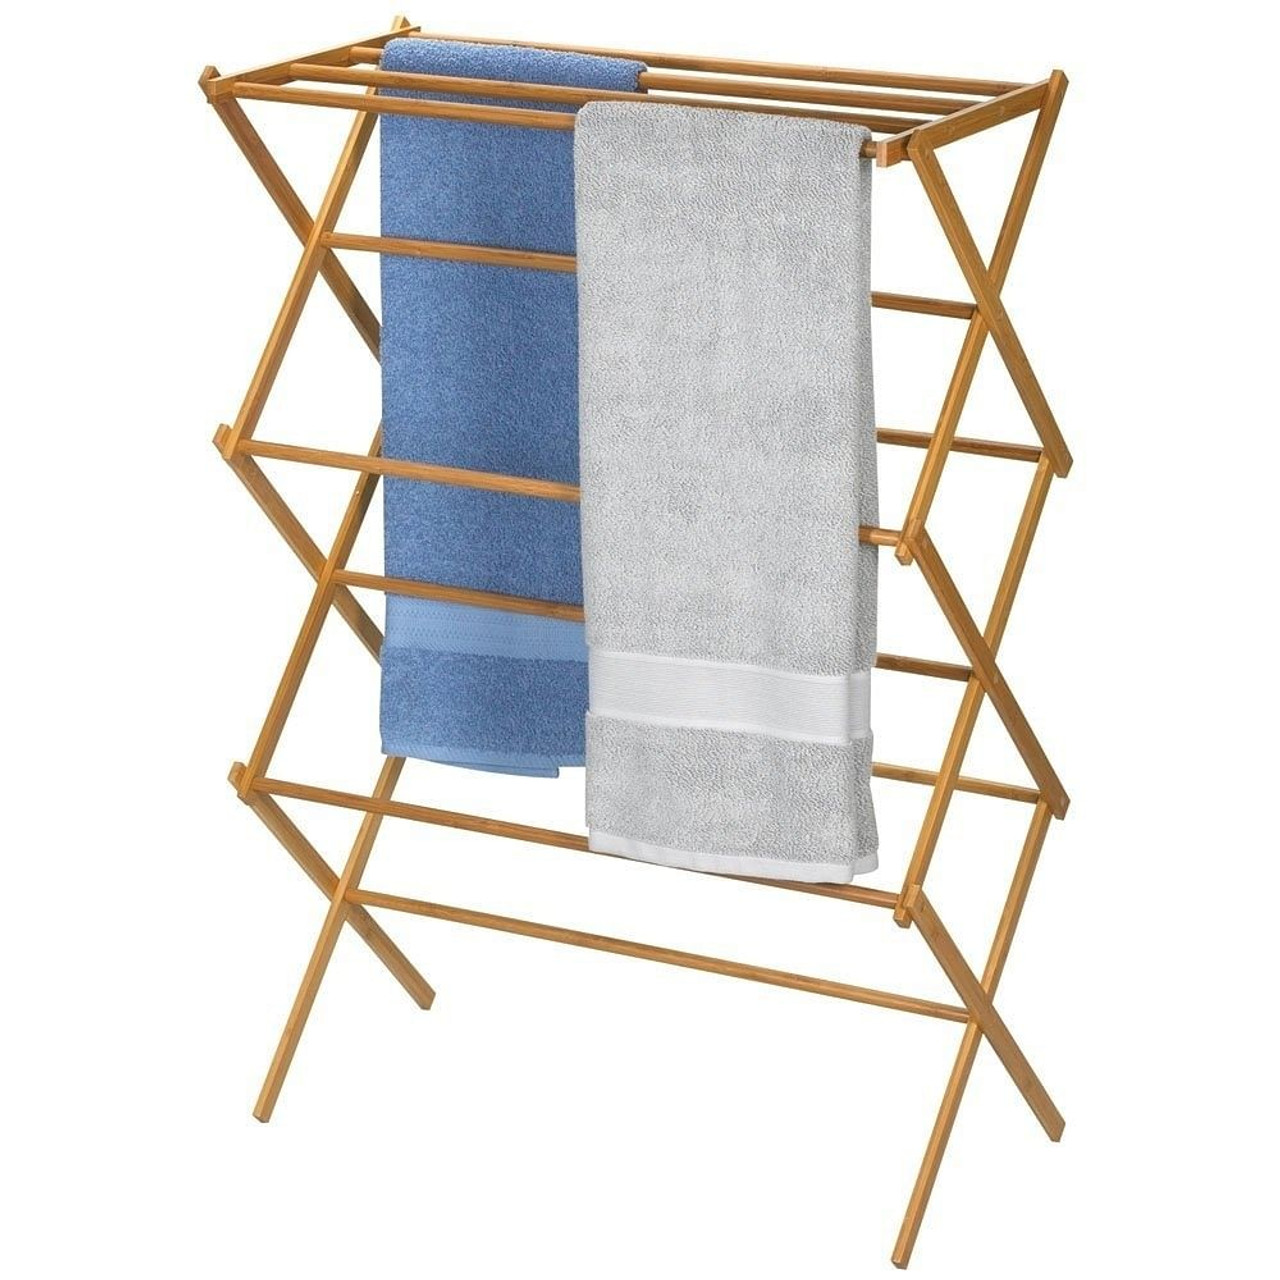 Folding Laundry Clothes Drying Rack in Bamboo Wood